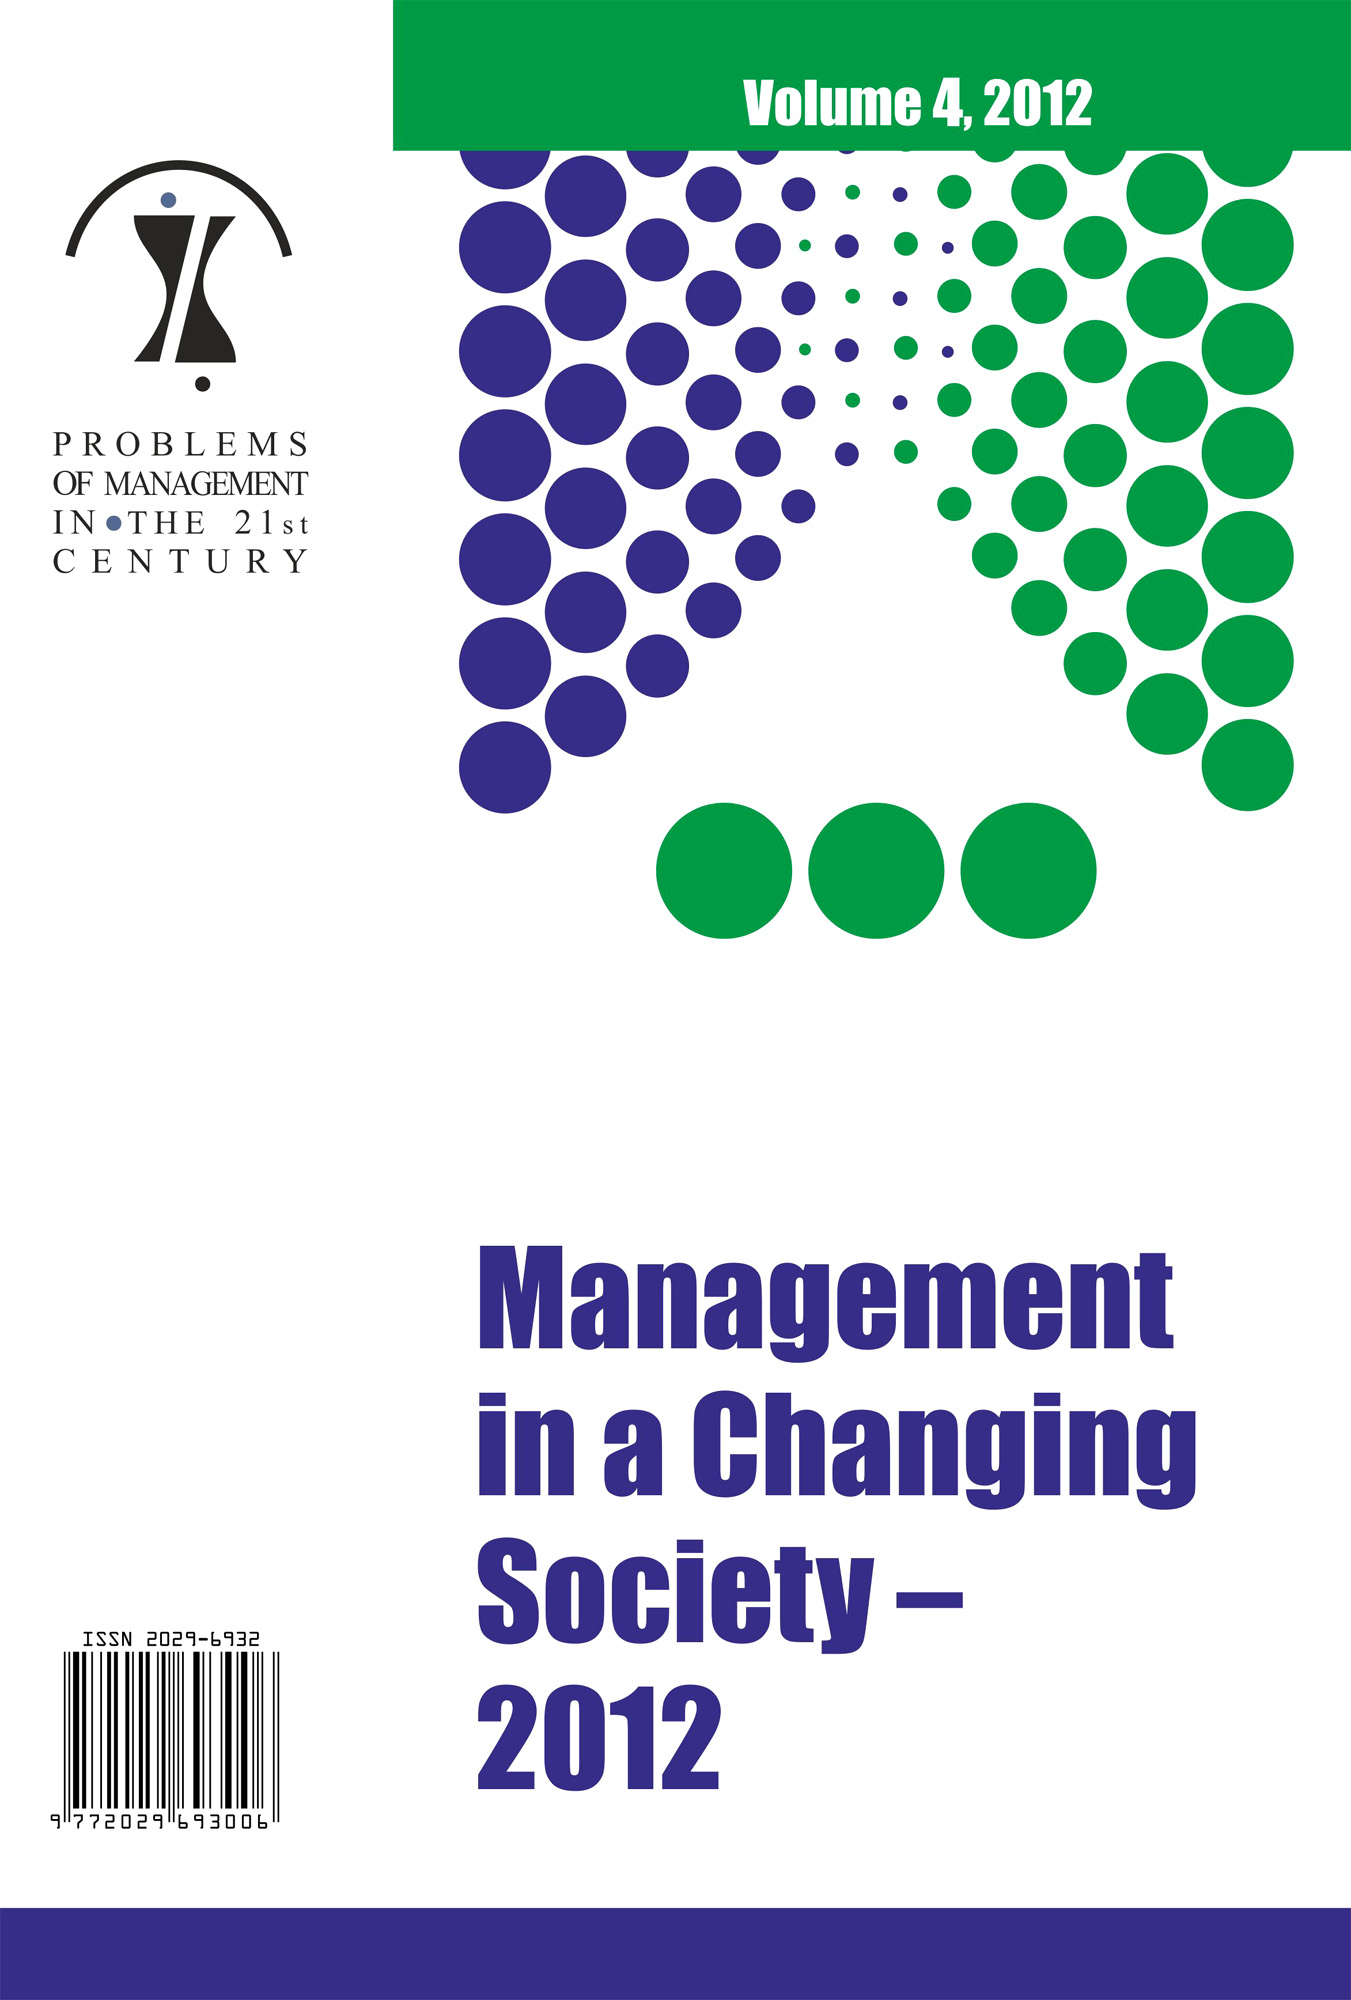 ORGANIZATIONAL AND PROFESSIONAL COMMITMENT:
THE COMPARATIVE STUDY Cover Image